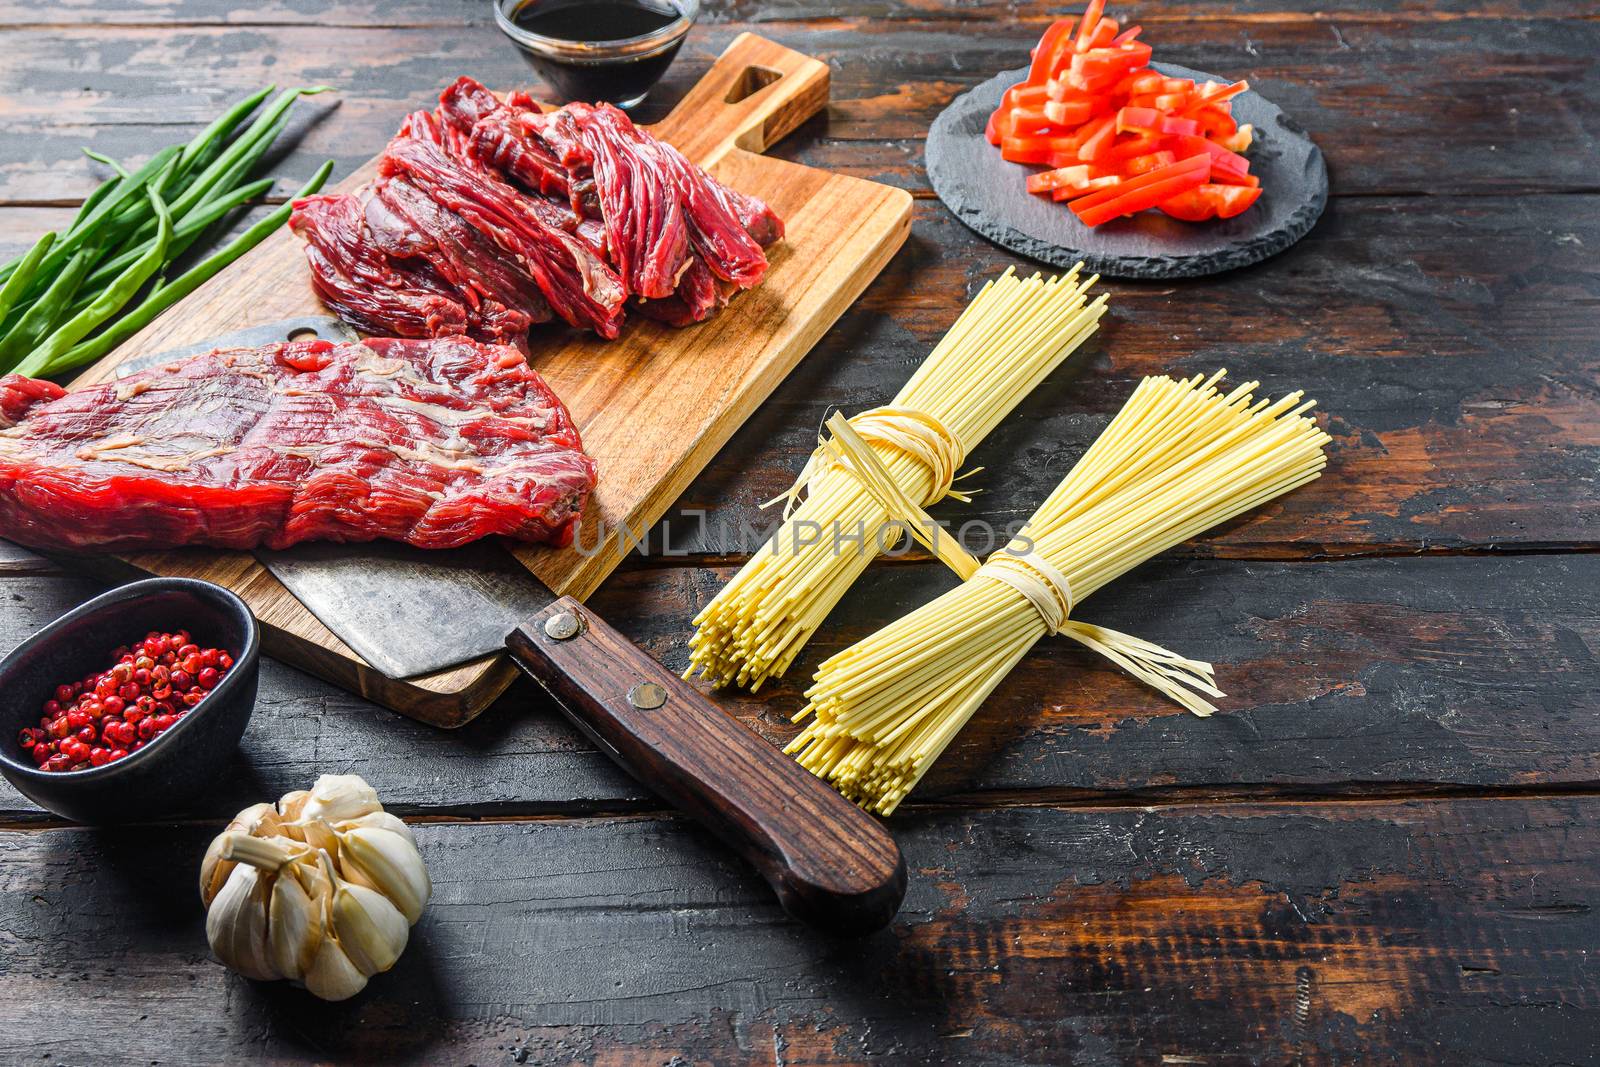 Chinese noodles with vegetables, . Machete steak and butcher cleaver over wooden background. Side view